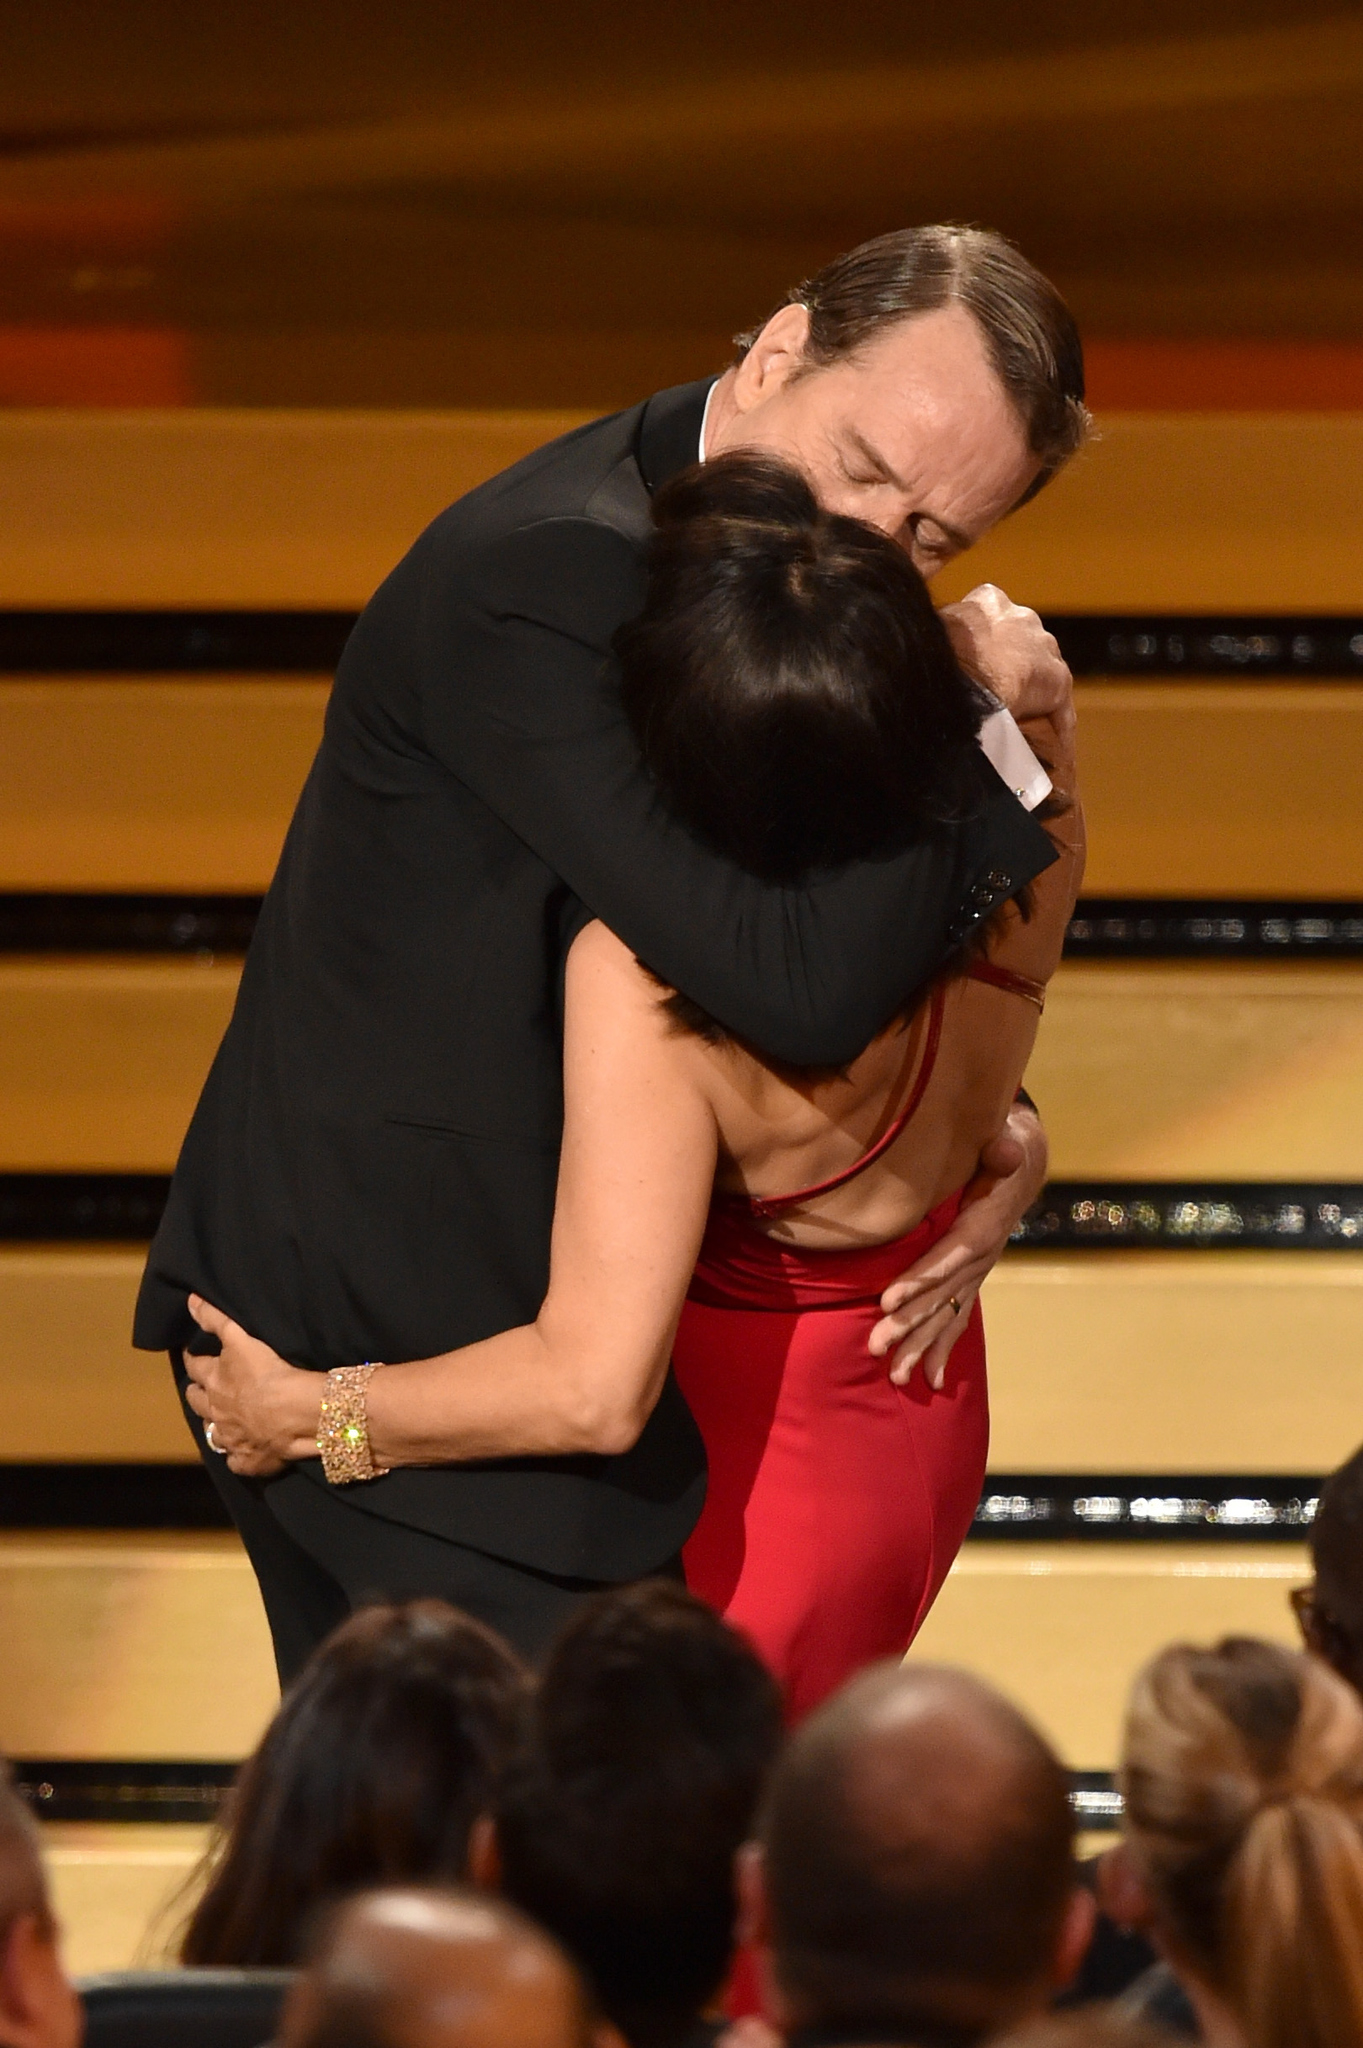 Julia Louis-Dreyfus and Bryan Cranston at event of The 66th Primetime Emmy Awards (2014)